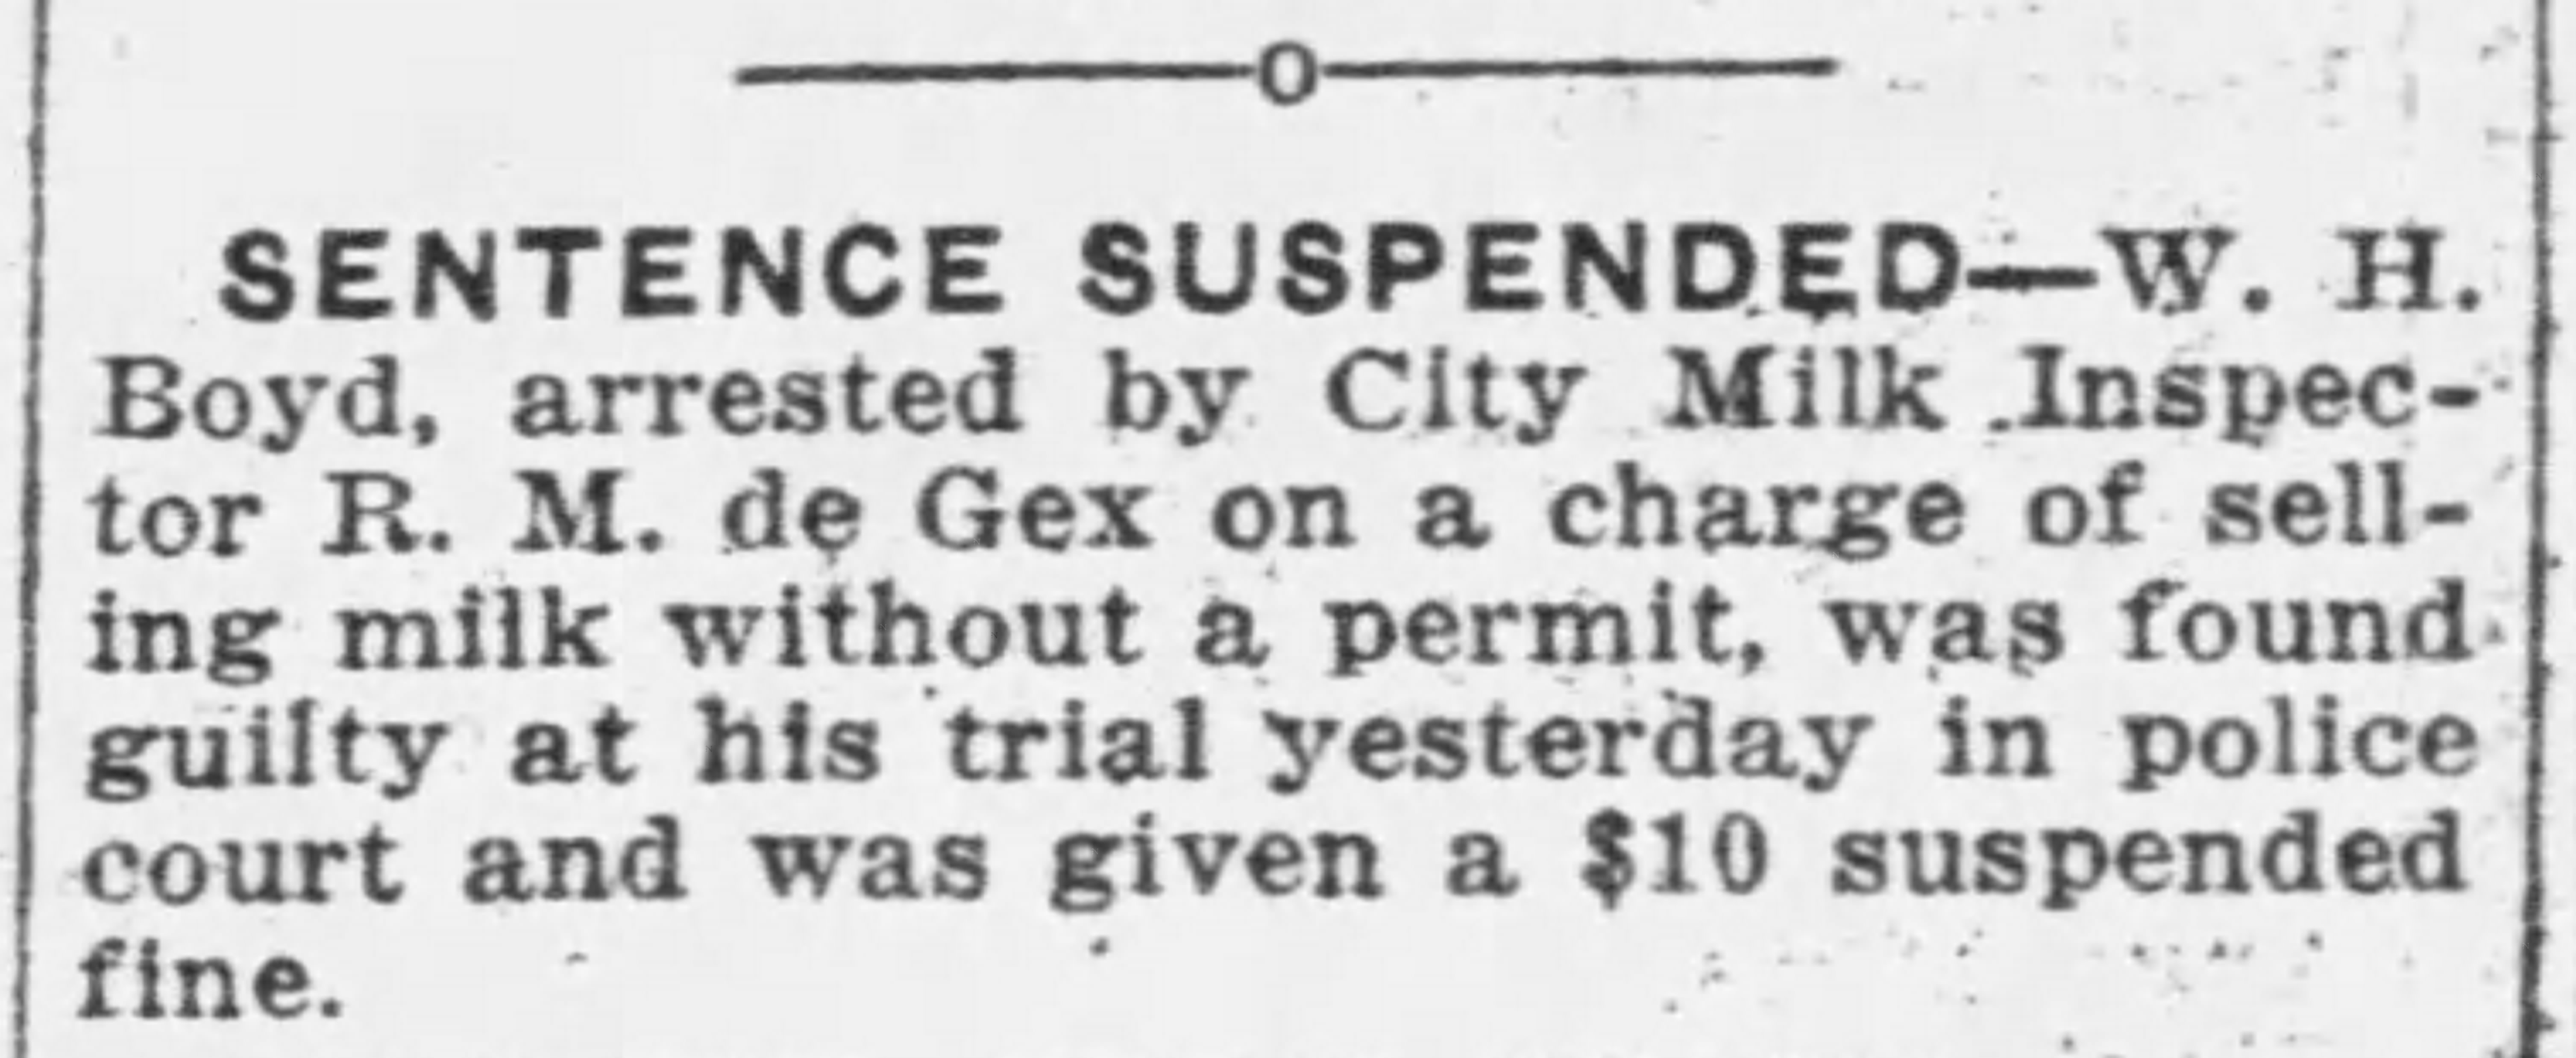 Arrest of W. H. Boyd for selling milk without a permit